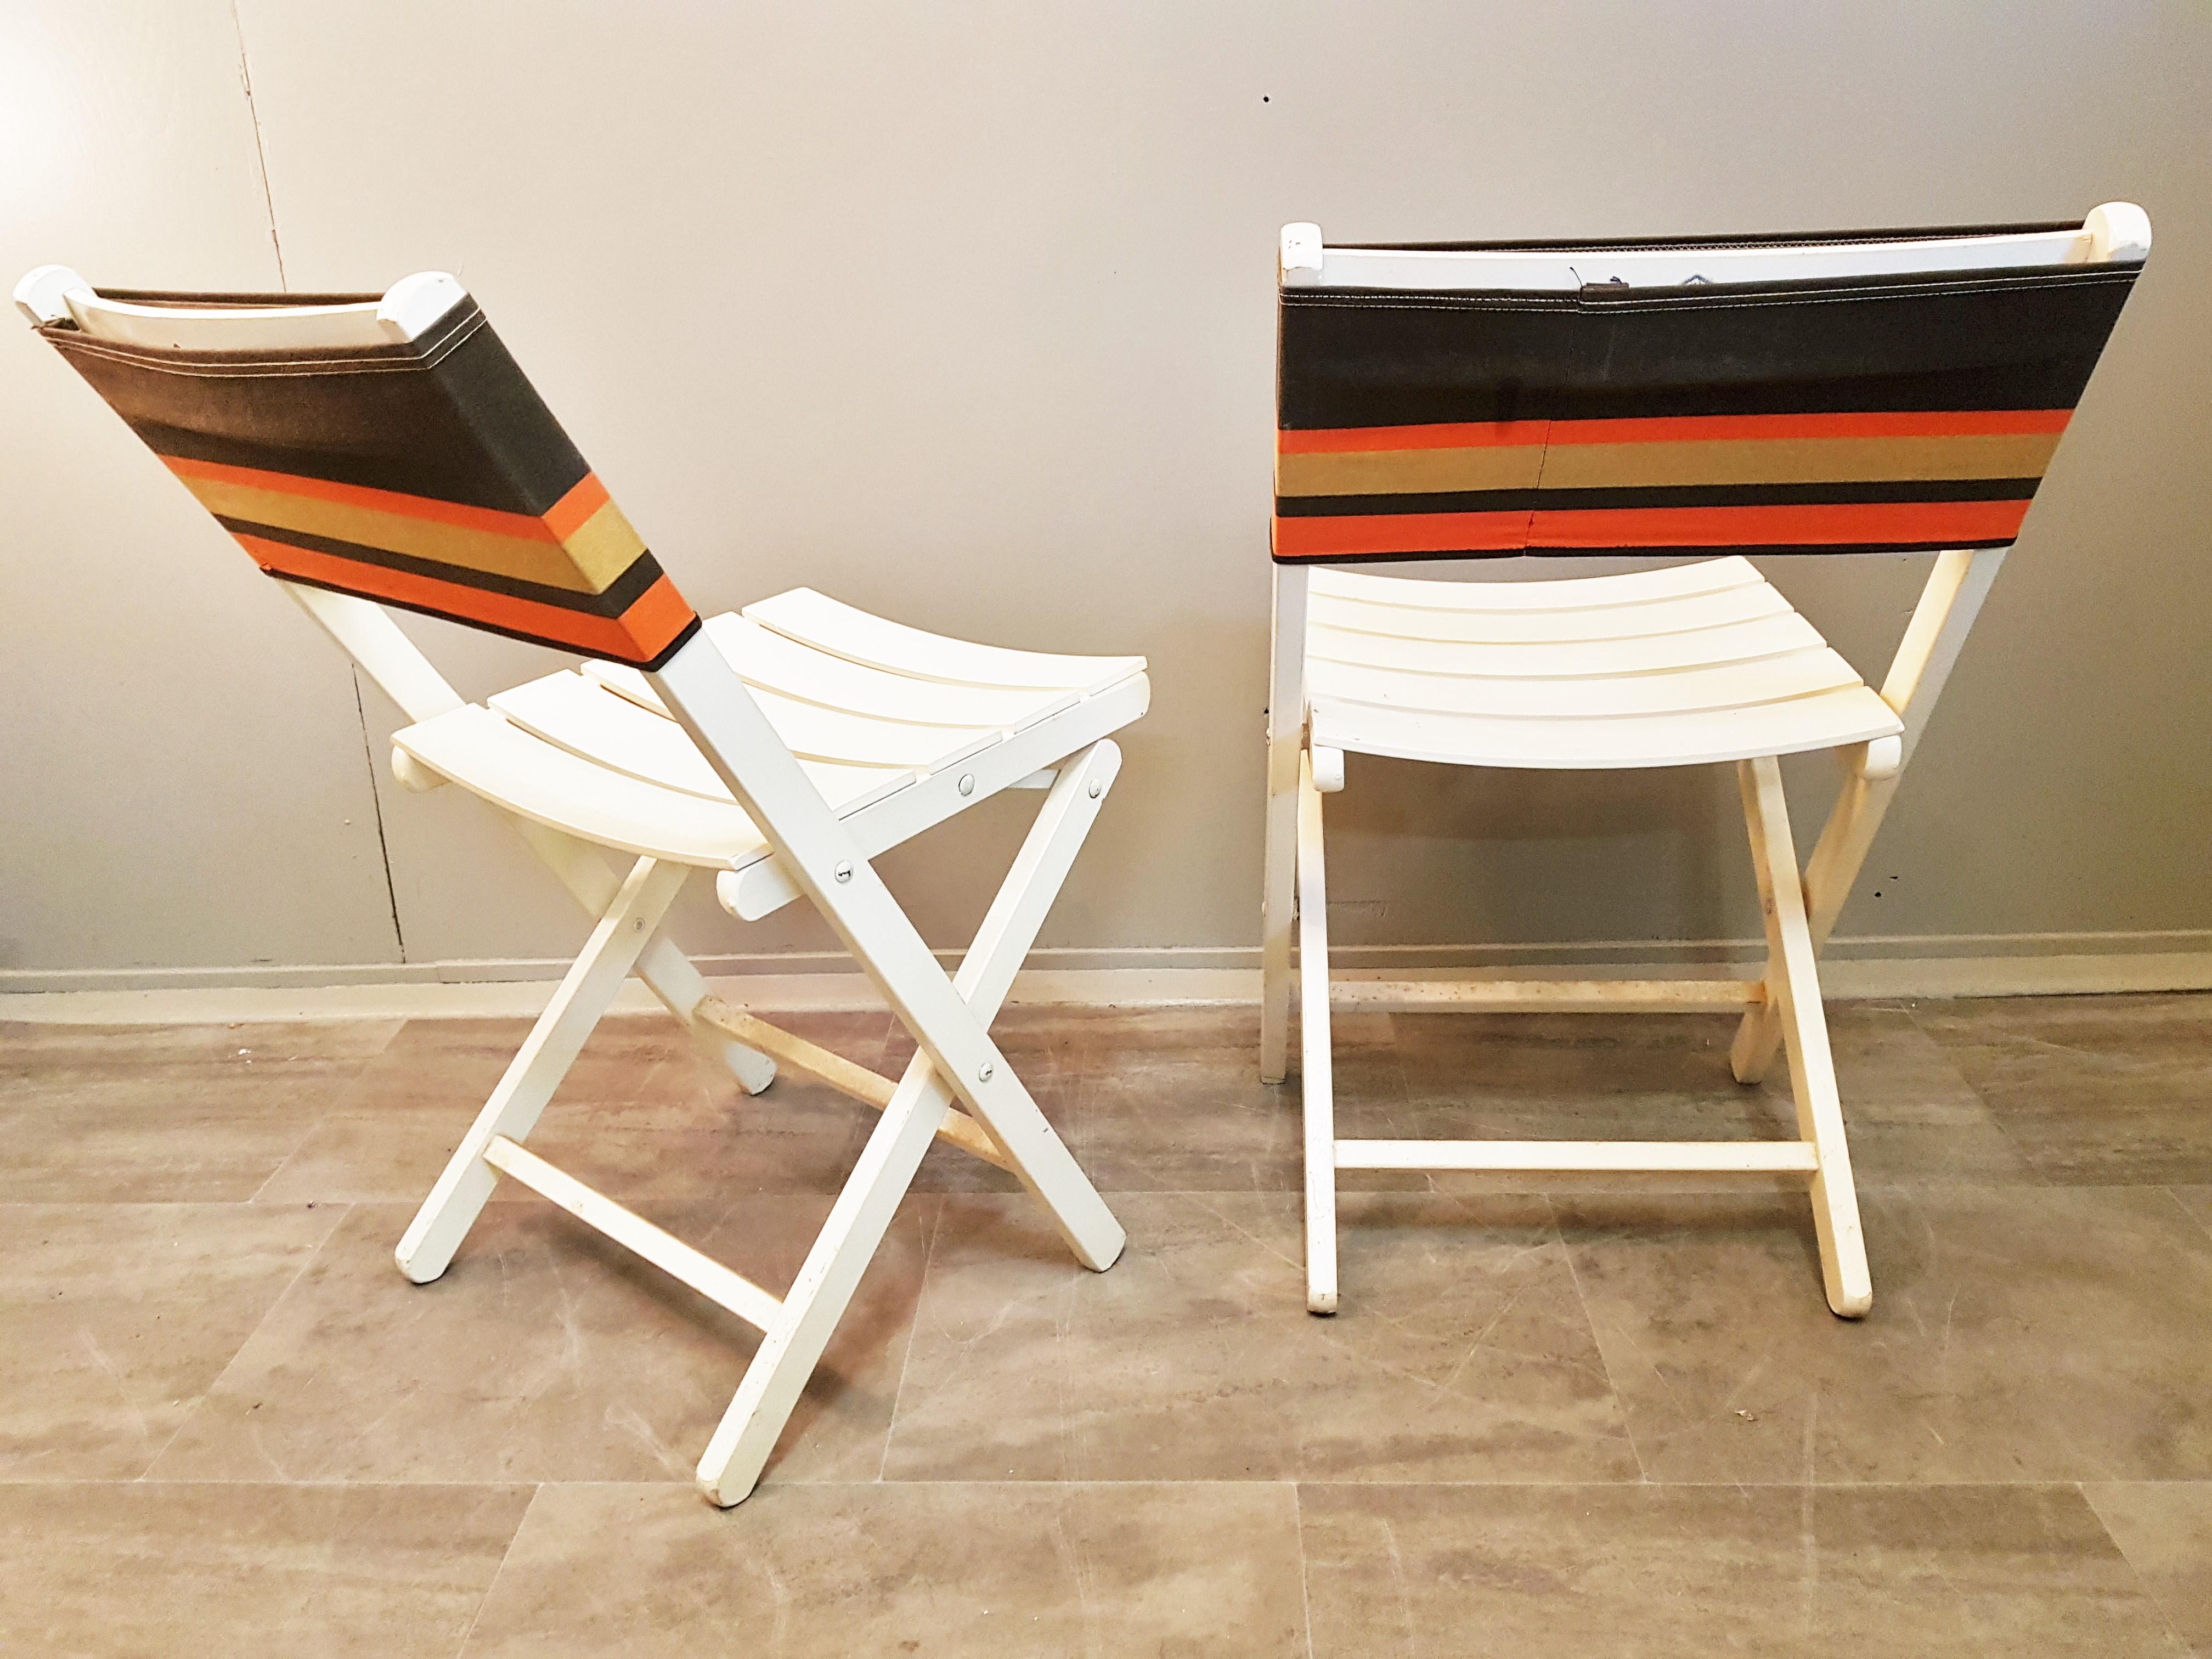 Boho Chic Set of 6 Midcentury Folding Chairs, France, 1960s For Sale 8